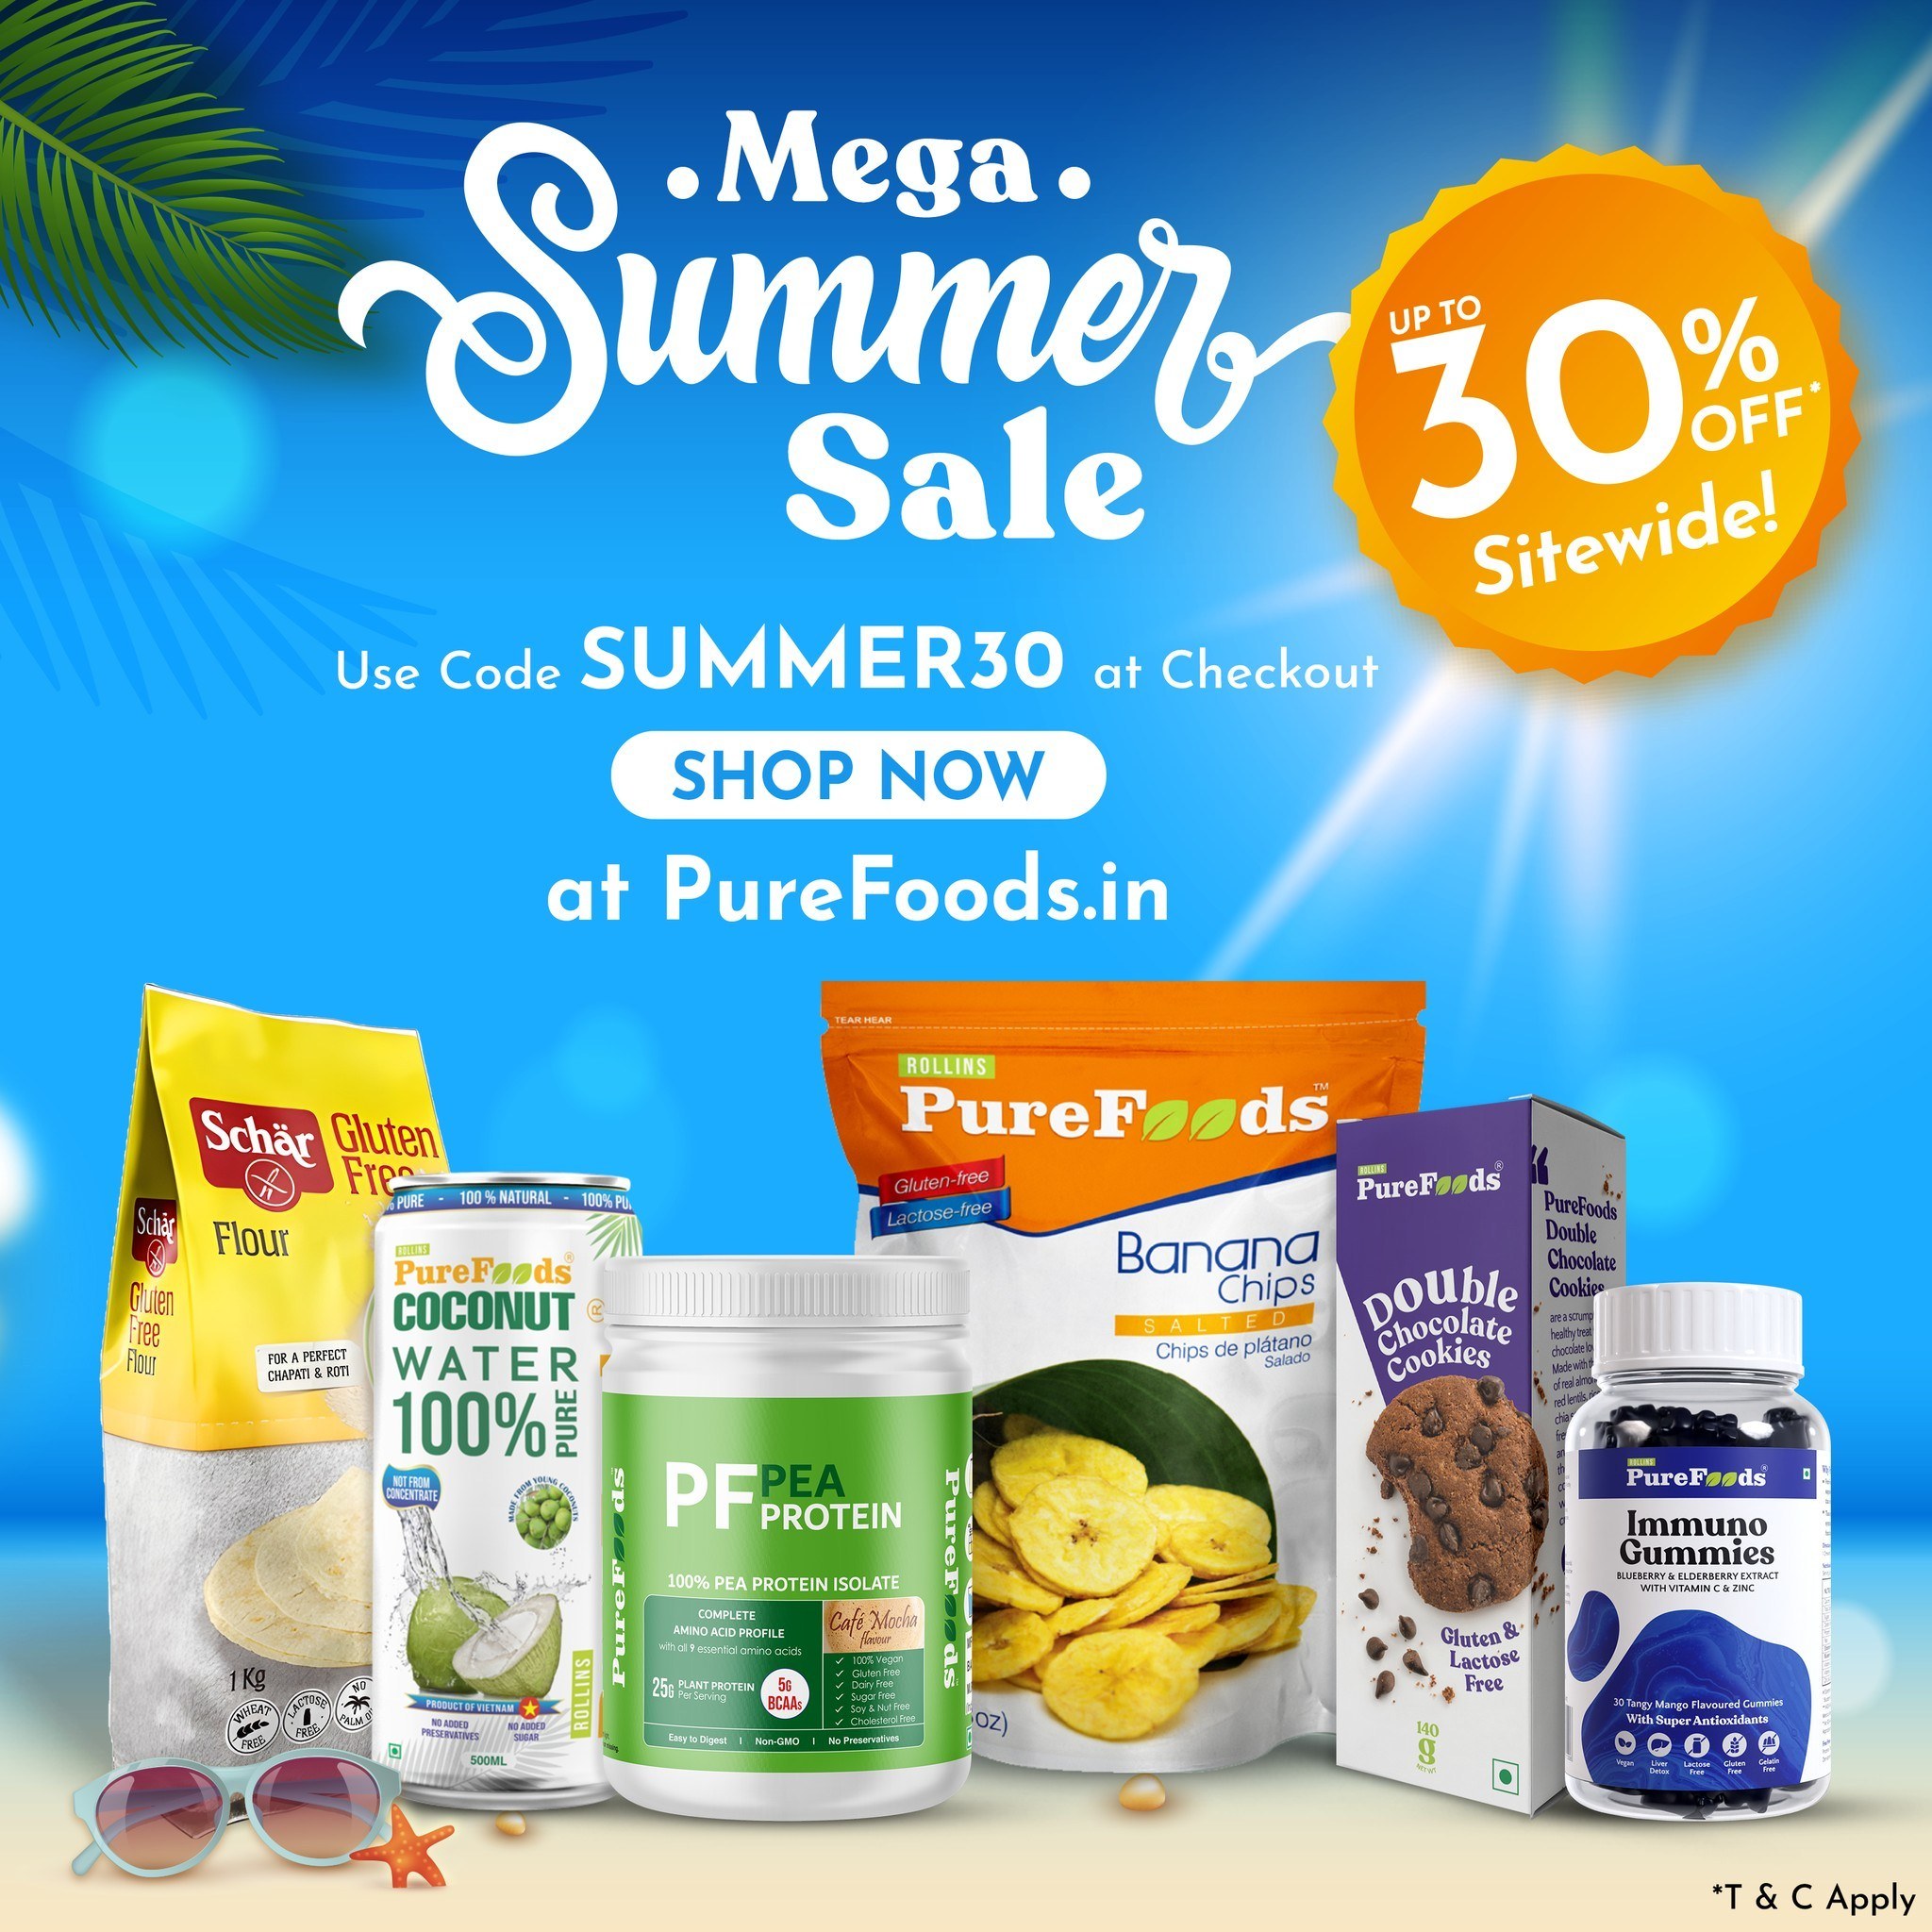 🌞🍉 PureFoods Mega Summer Sale is Now Live! Get Up to an Additional 30% OFF on your favorite Gluten-Free and Lactose-Free Delights! 🌻🍹

Beat the heat while satisfying your taste buds with PureFoods' wide range of great tasting and super healthy foods, drinks, and supplements! 🍽️🥥

🍉 Dive into a world of summer-y flavors! From mouthwatering Banana Chips to thirst-quenching Pure Coconut Water to deliciously healthy Vegan Protein Powder, we've got everything you need for a truly wholesome summer! 🌿✨

🌞☀️ Don't miss out on the hottest deals of the season on PureFoods products! Visit www.PureFoods.in today and use code SUMMER30 at checkout to enjoy an EXTRA 30% discount on your order! 💸

Get ready to savor the summer breeze without worrying about your health. Hurry along, this sizzling offer won't last forever! 🔥🏃‍♀️

#PureFoods #SummerSale #GlutenFree #LactoseFree #HealthyLiving #TasteofSummer #summer #summervibes #summerstyle #summercollection #sale #SaleAlert #salesalesale #sales #vegan #veganlife #veganfood #vegansofig #veganindia #veganindian #veganindianfood #glutenfreelife #glutenfreefood #glutenfreeindia #glutenfreeindian #glutenfreeindianfood #lactosefreeindia